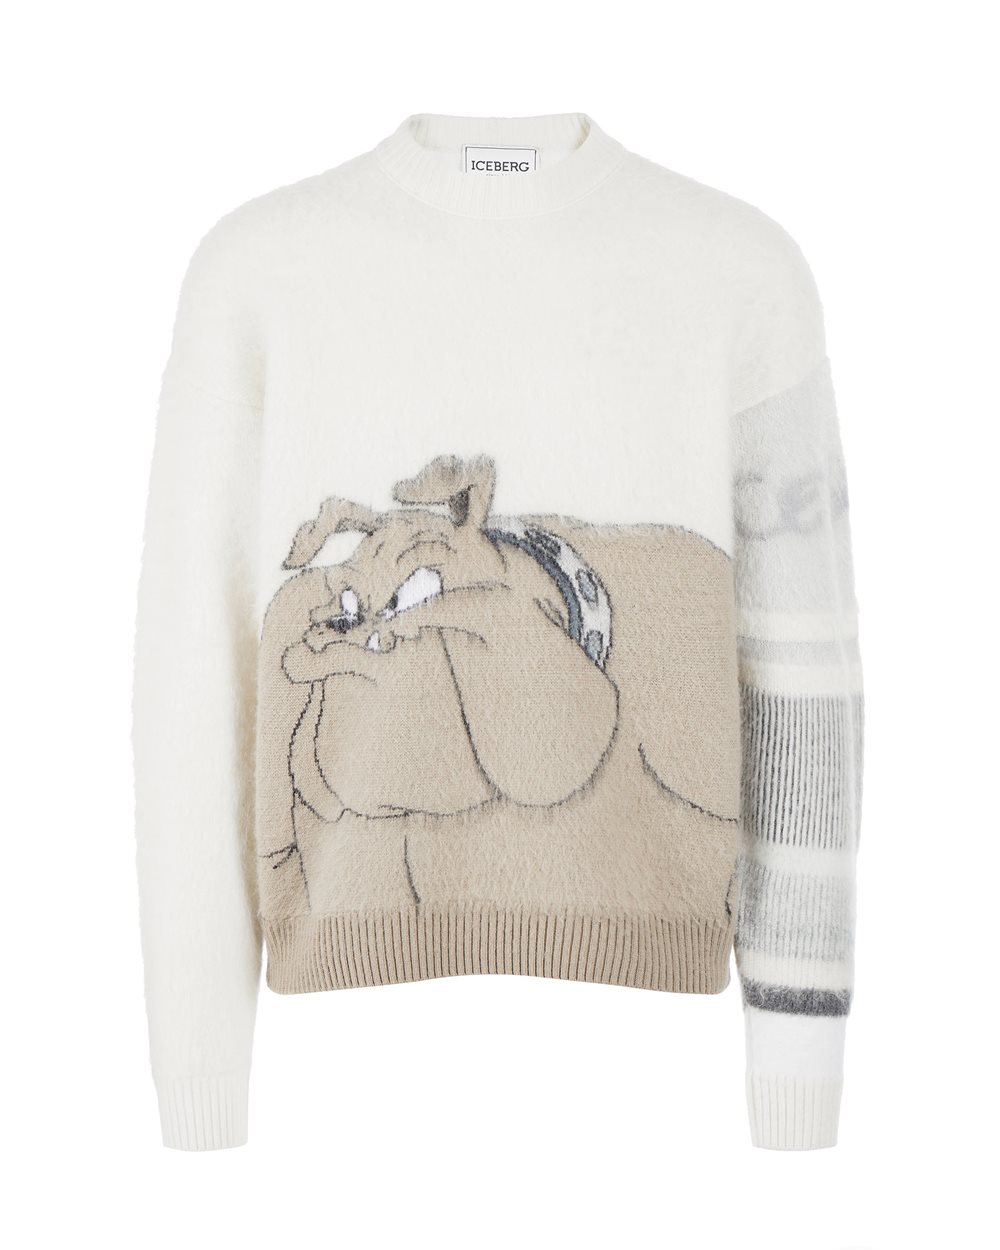 Jumper with cartoon detail - Fashion Show Man | Iceberg - Official Website